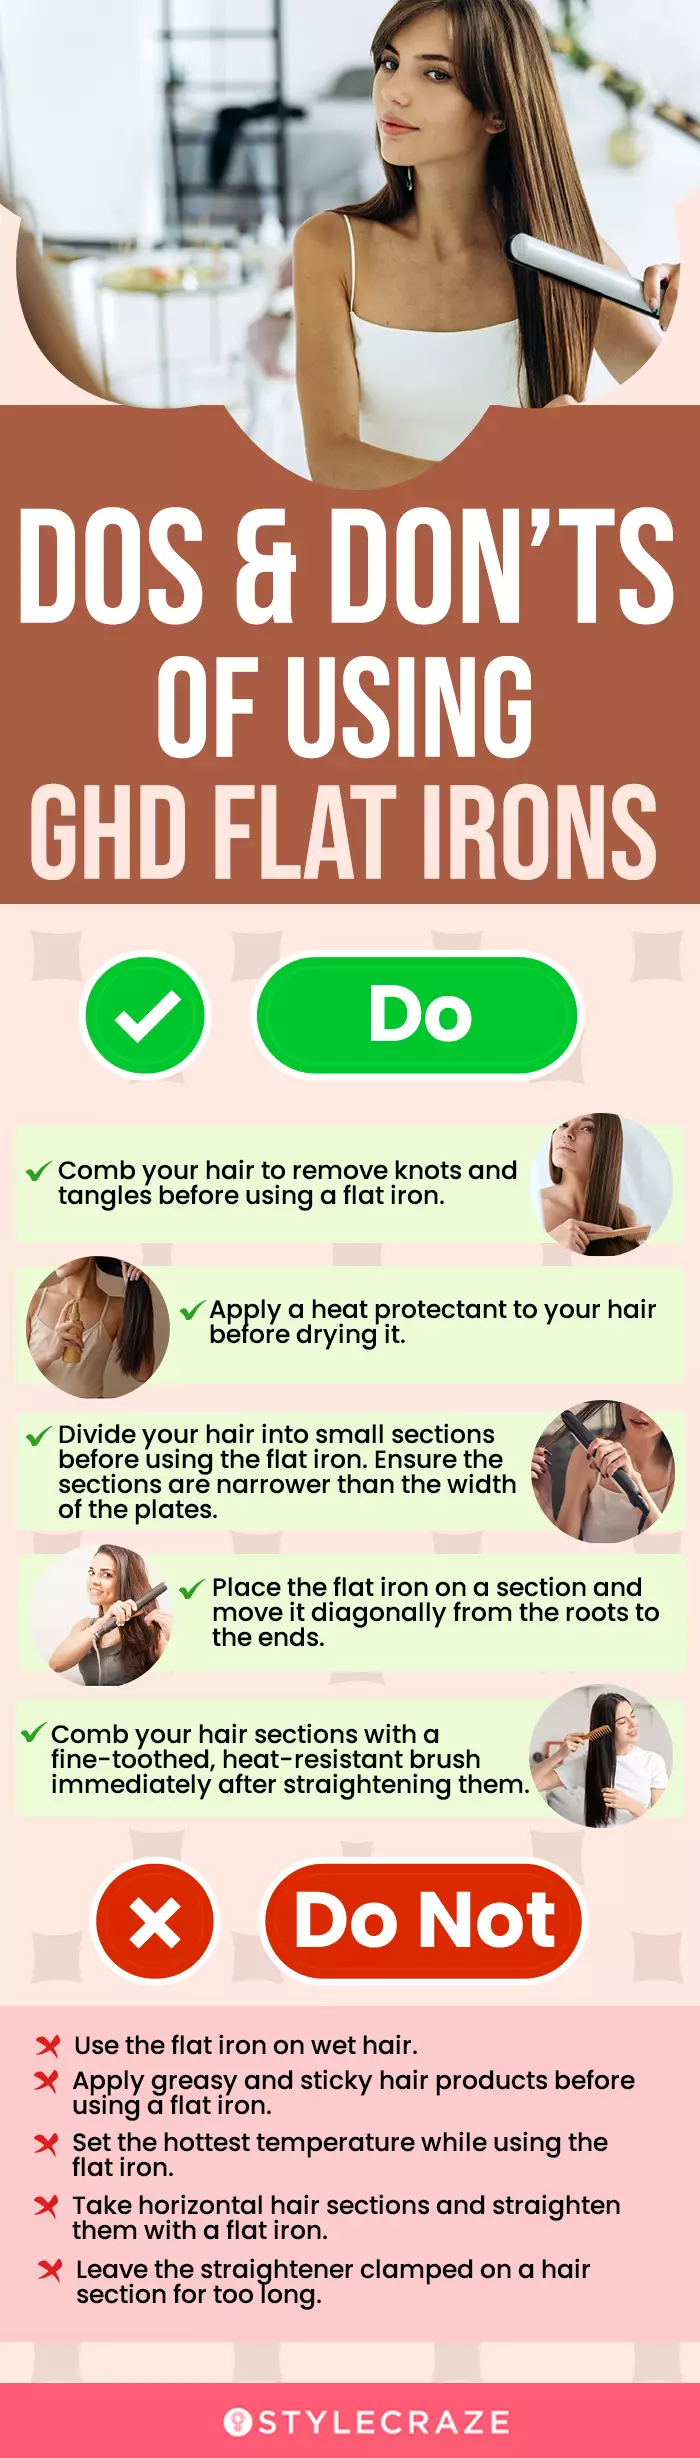 Dos & Don’ts Of Using ghd Flat Irons (infographic)